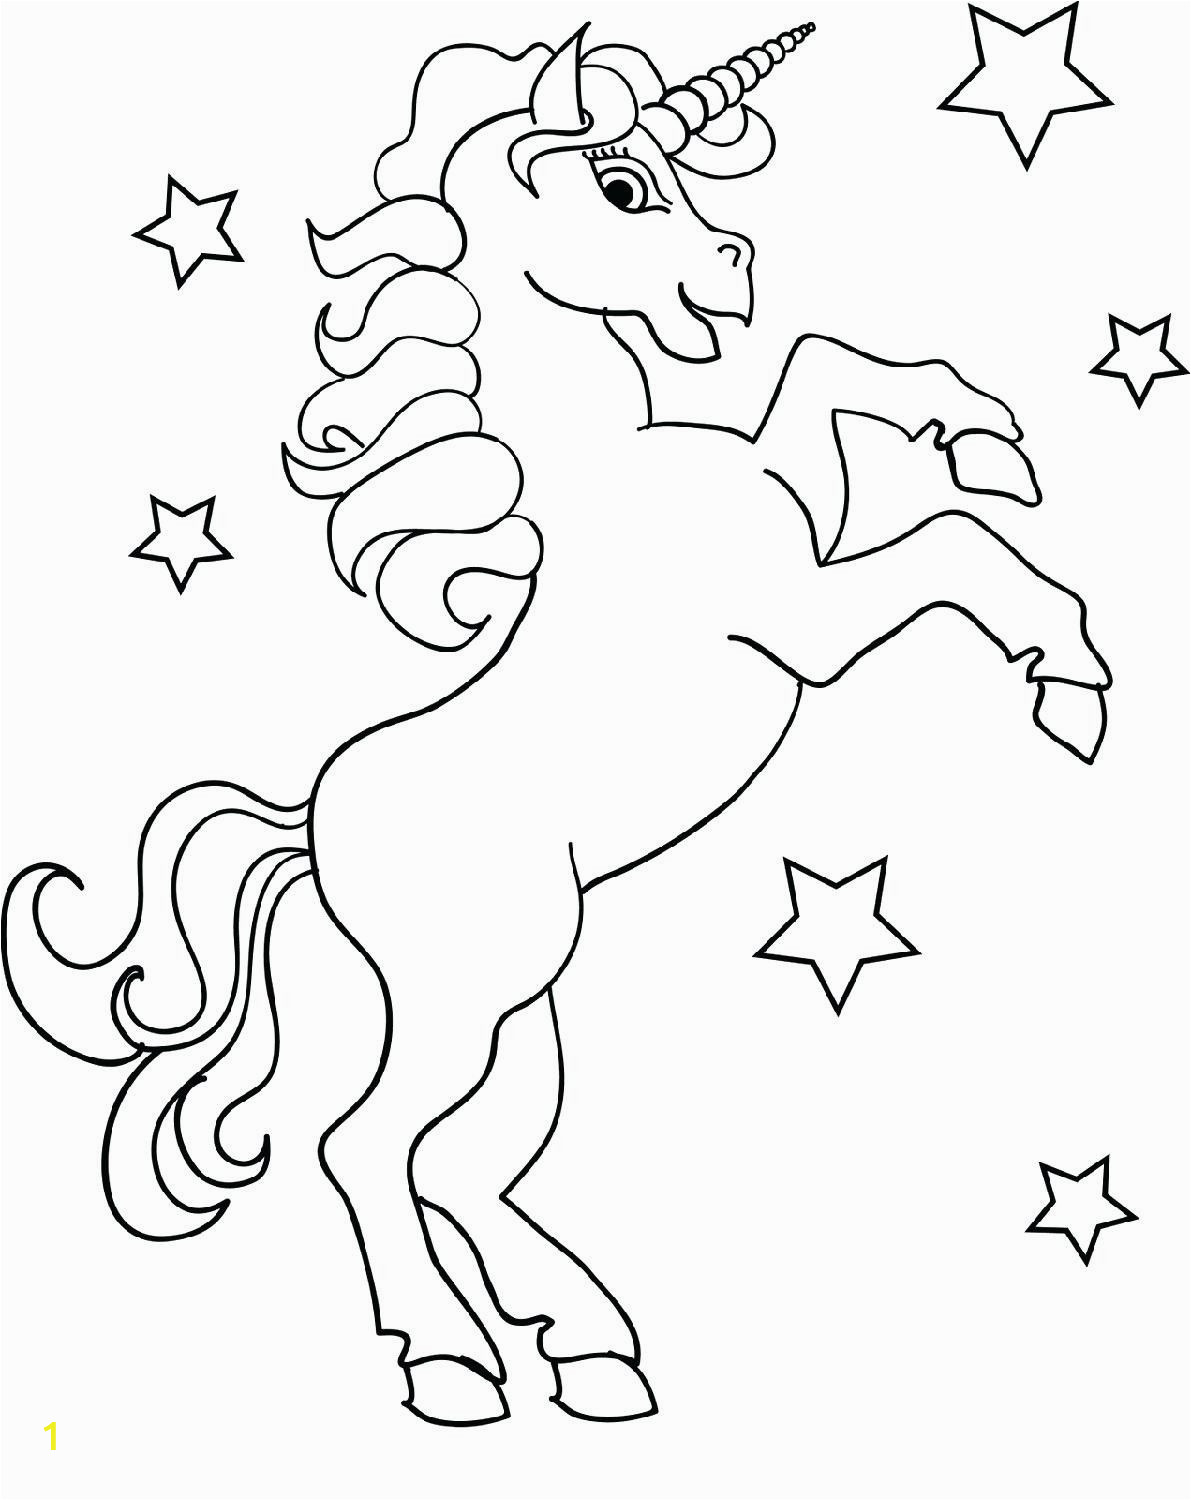 Princess Unicorn Coloring Page Printable Unicorn Coloring Pages Ideas for Kids